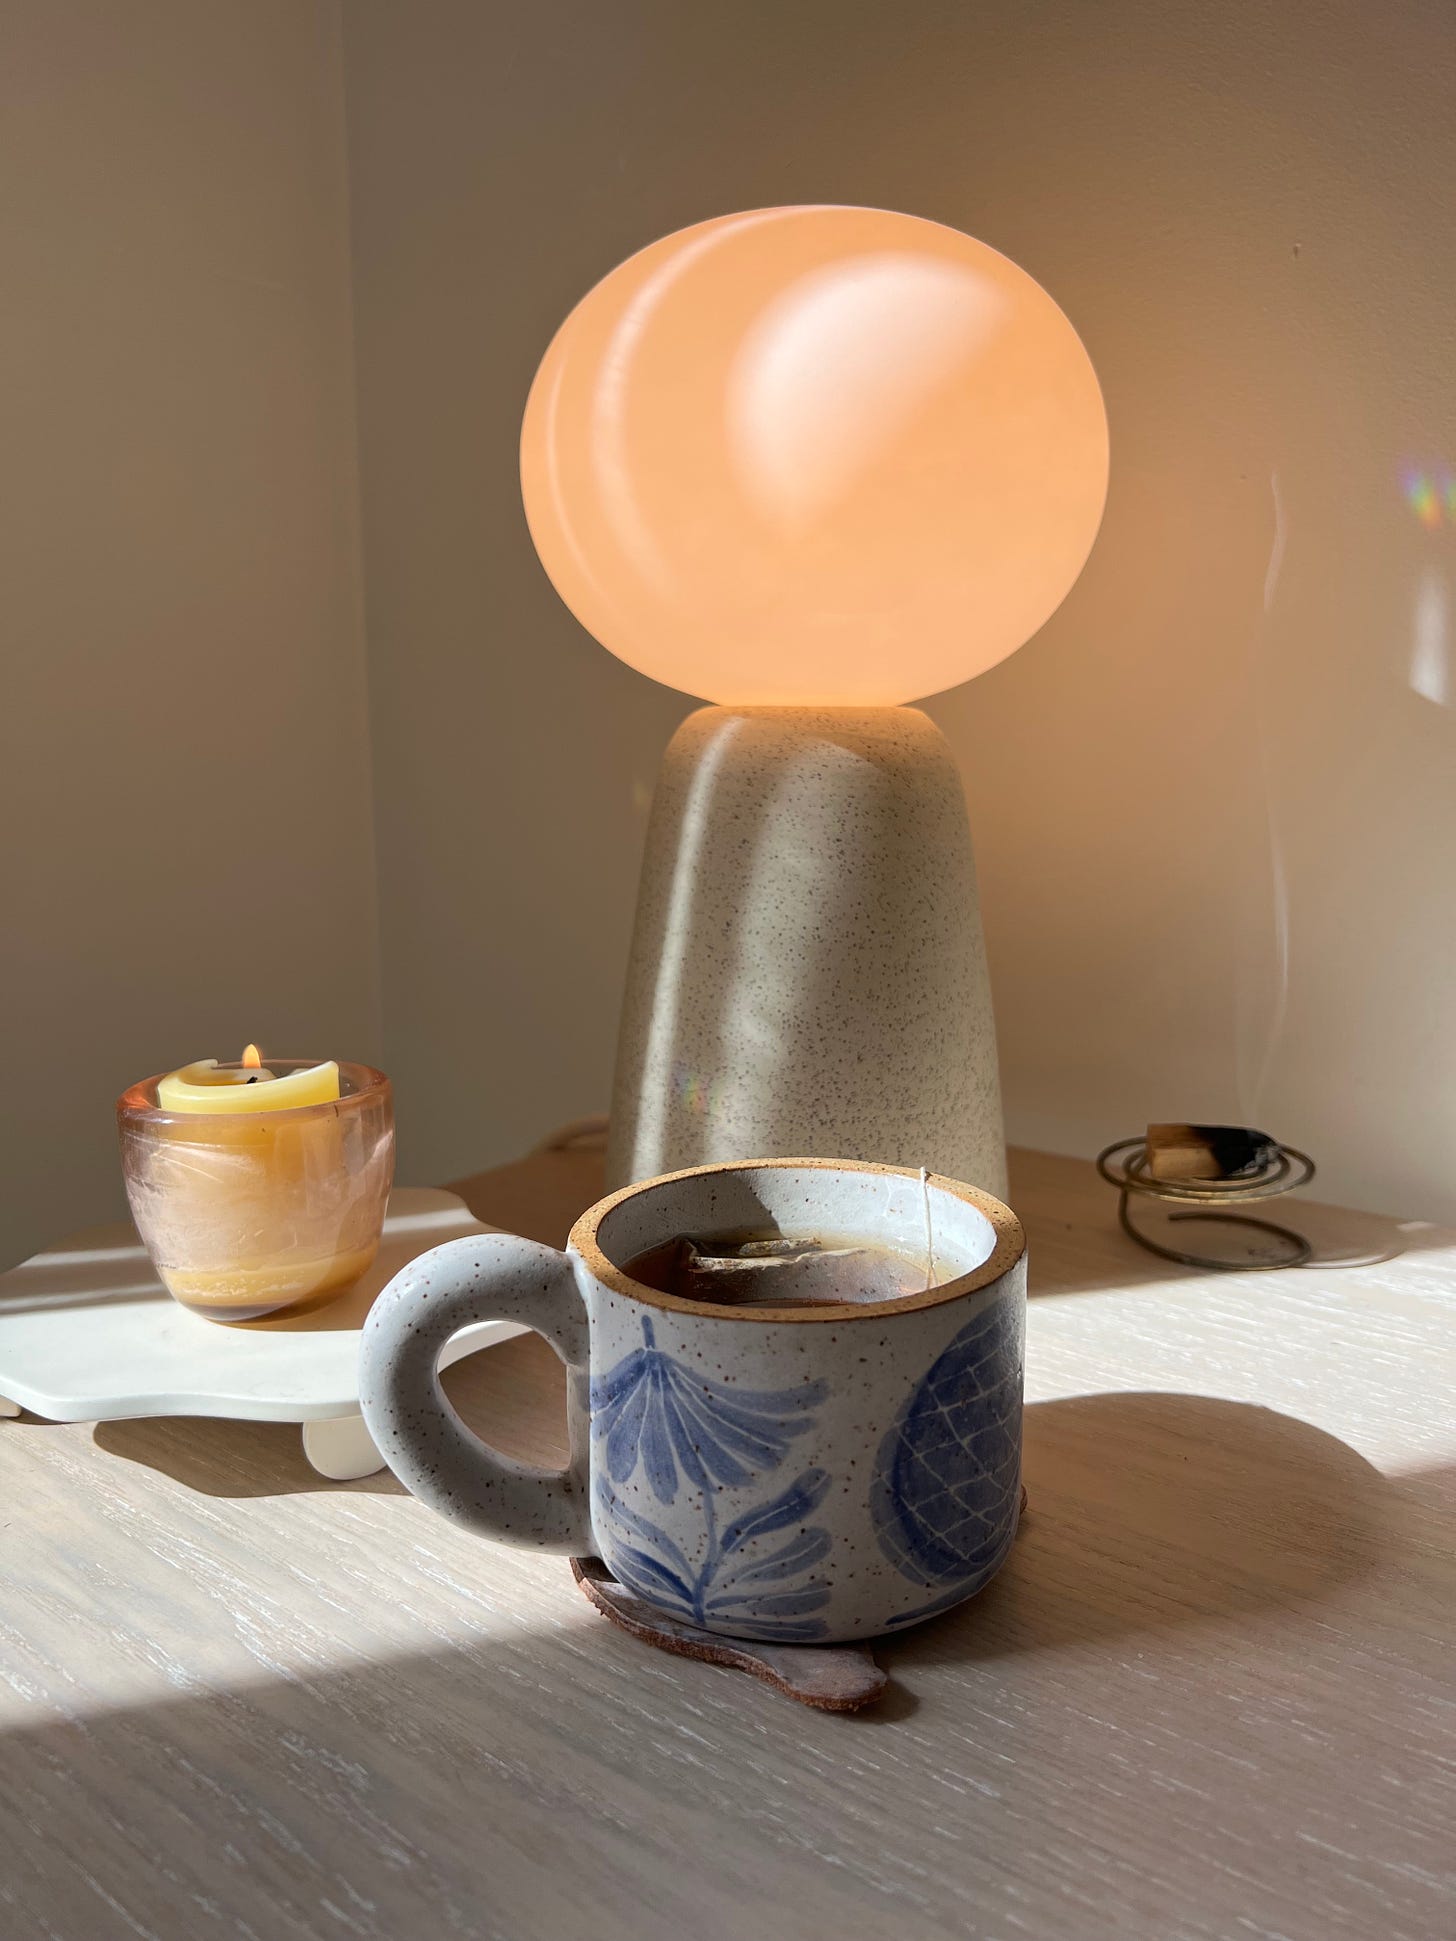 Photo of a ceramic lamp, ceramic mug with blue illustrations, and a beeswax candle.